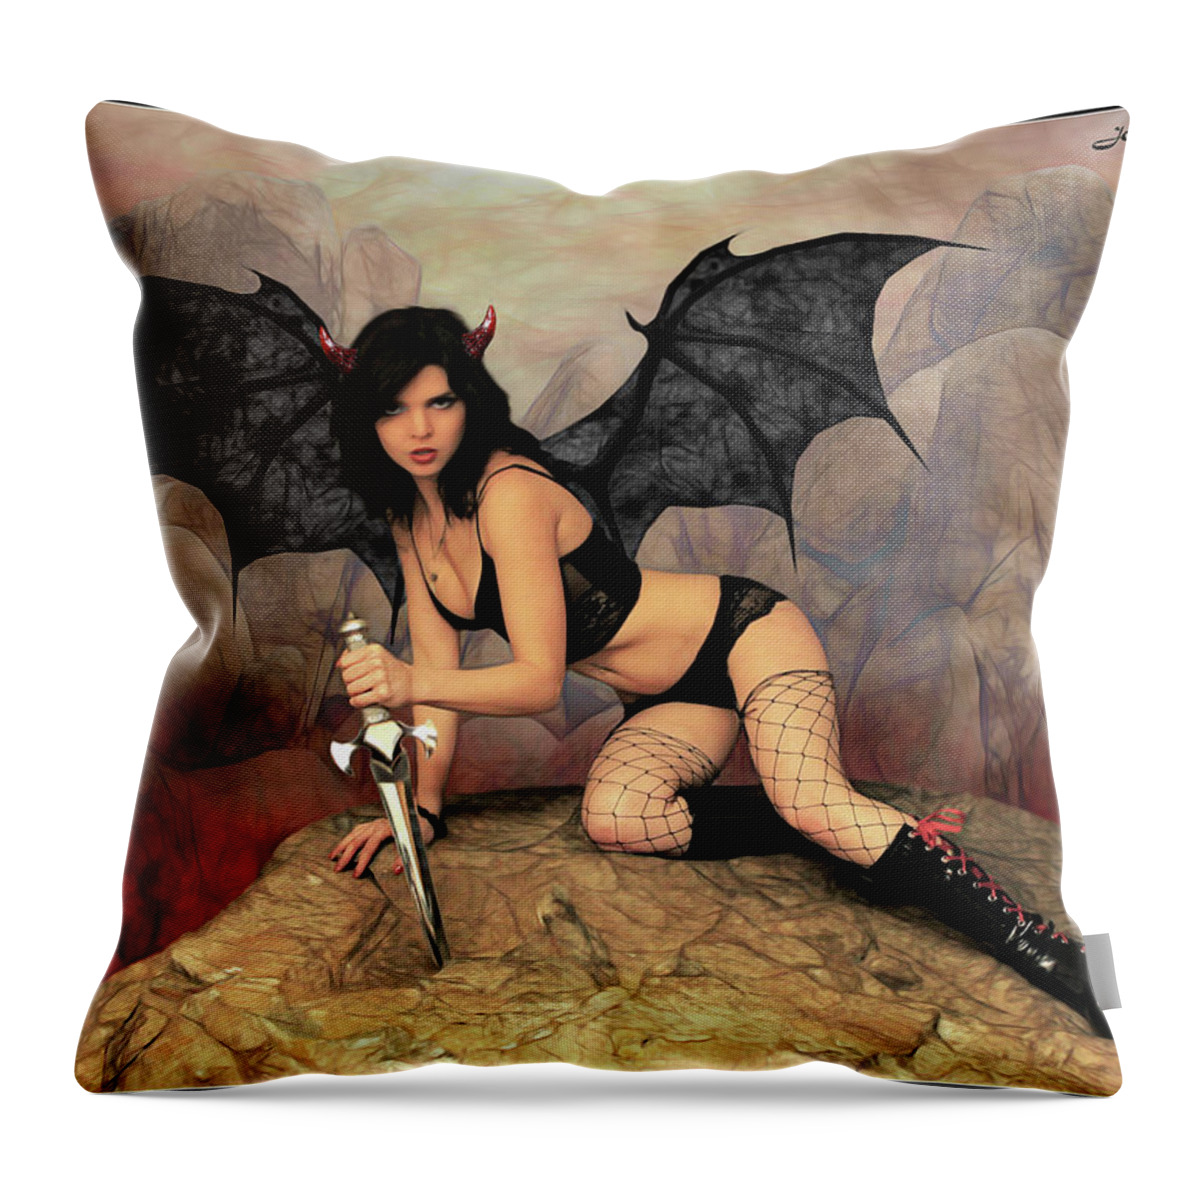 Rebel Throw Pillow featuring the photograph Succubus With Dagger by Jon Volden